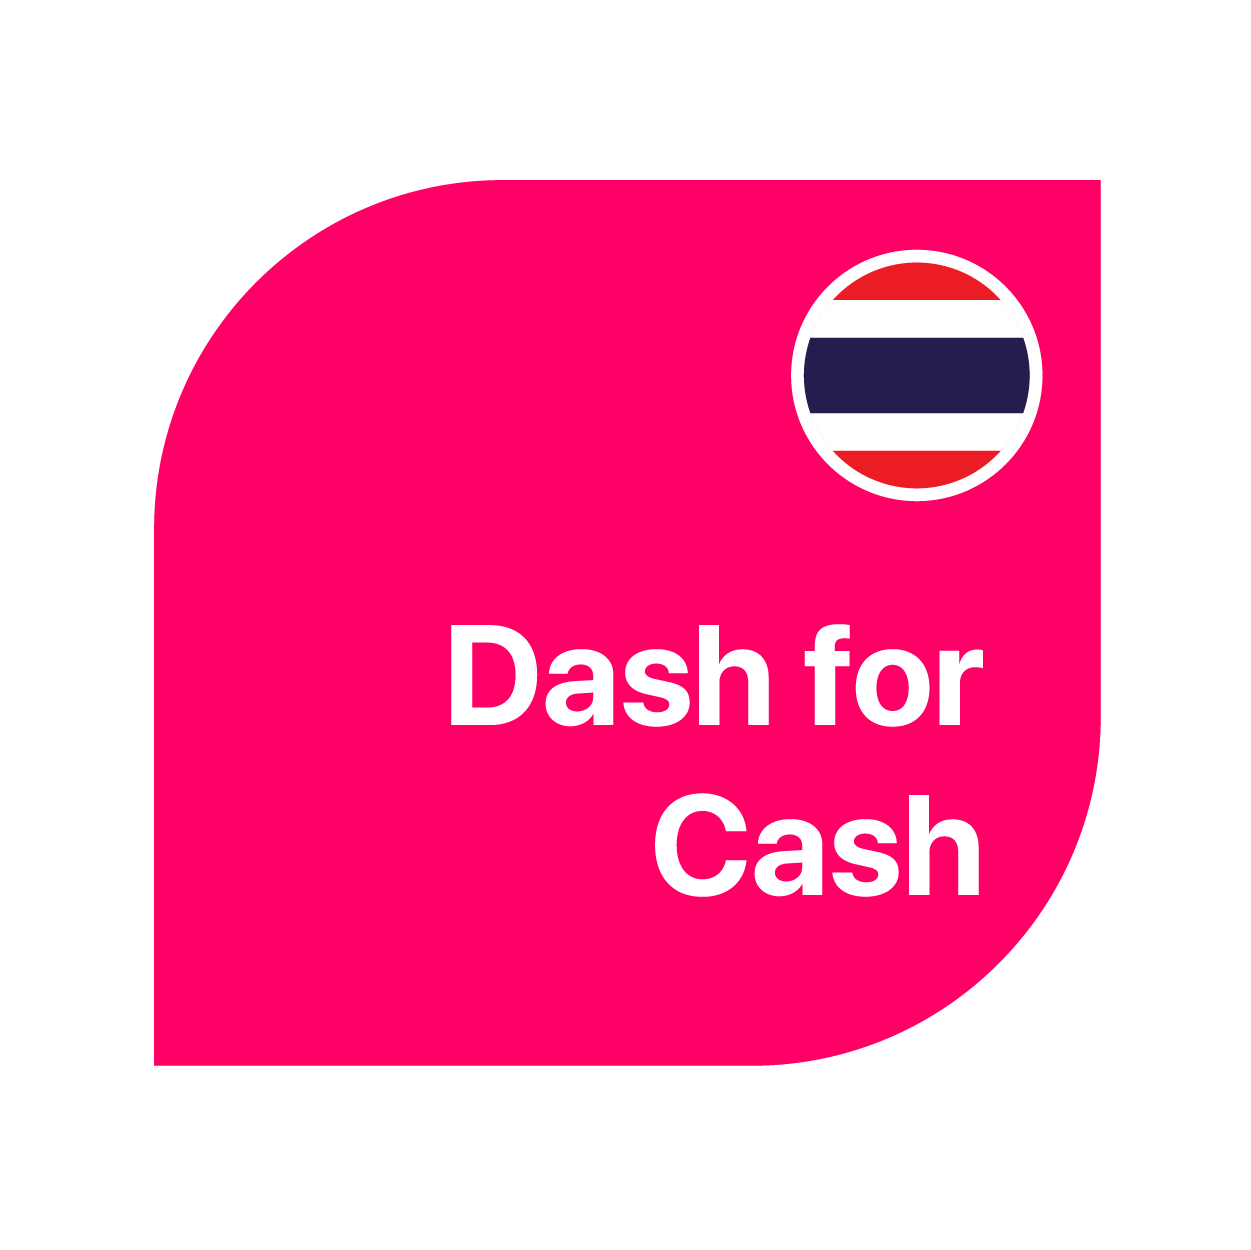 Cash_for_Dash_TH-02.png